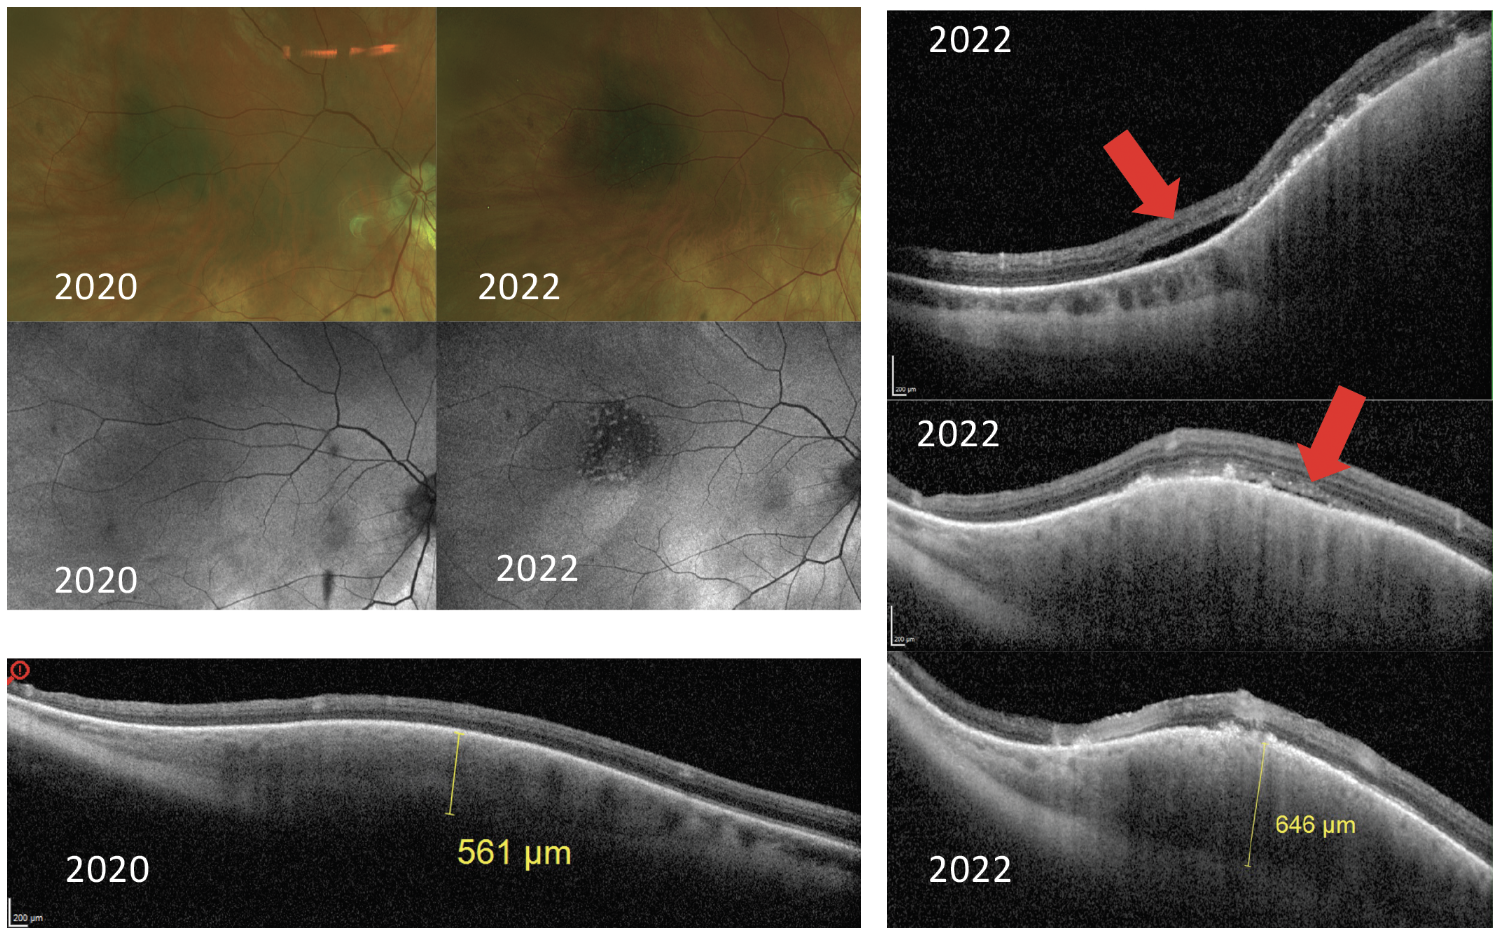 Fig. 13. A patient presents with a choroidal nevus in 2020 with normal overlying autofluorescence, total thickness on OCT of 561μm and no sign of subretinal fluid on OCT. In 2022, the lesion has mild growth in diameter, but there are concerning findings of hyper-autofluorescence on FAF, growth in thickness shown on OCT and new presence of subretinal fluid on OCT (red arrows). These findings are concerning due to the risk of conversion to ocular melanoma.